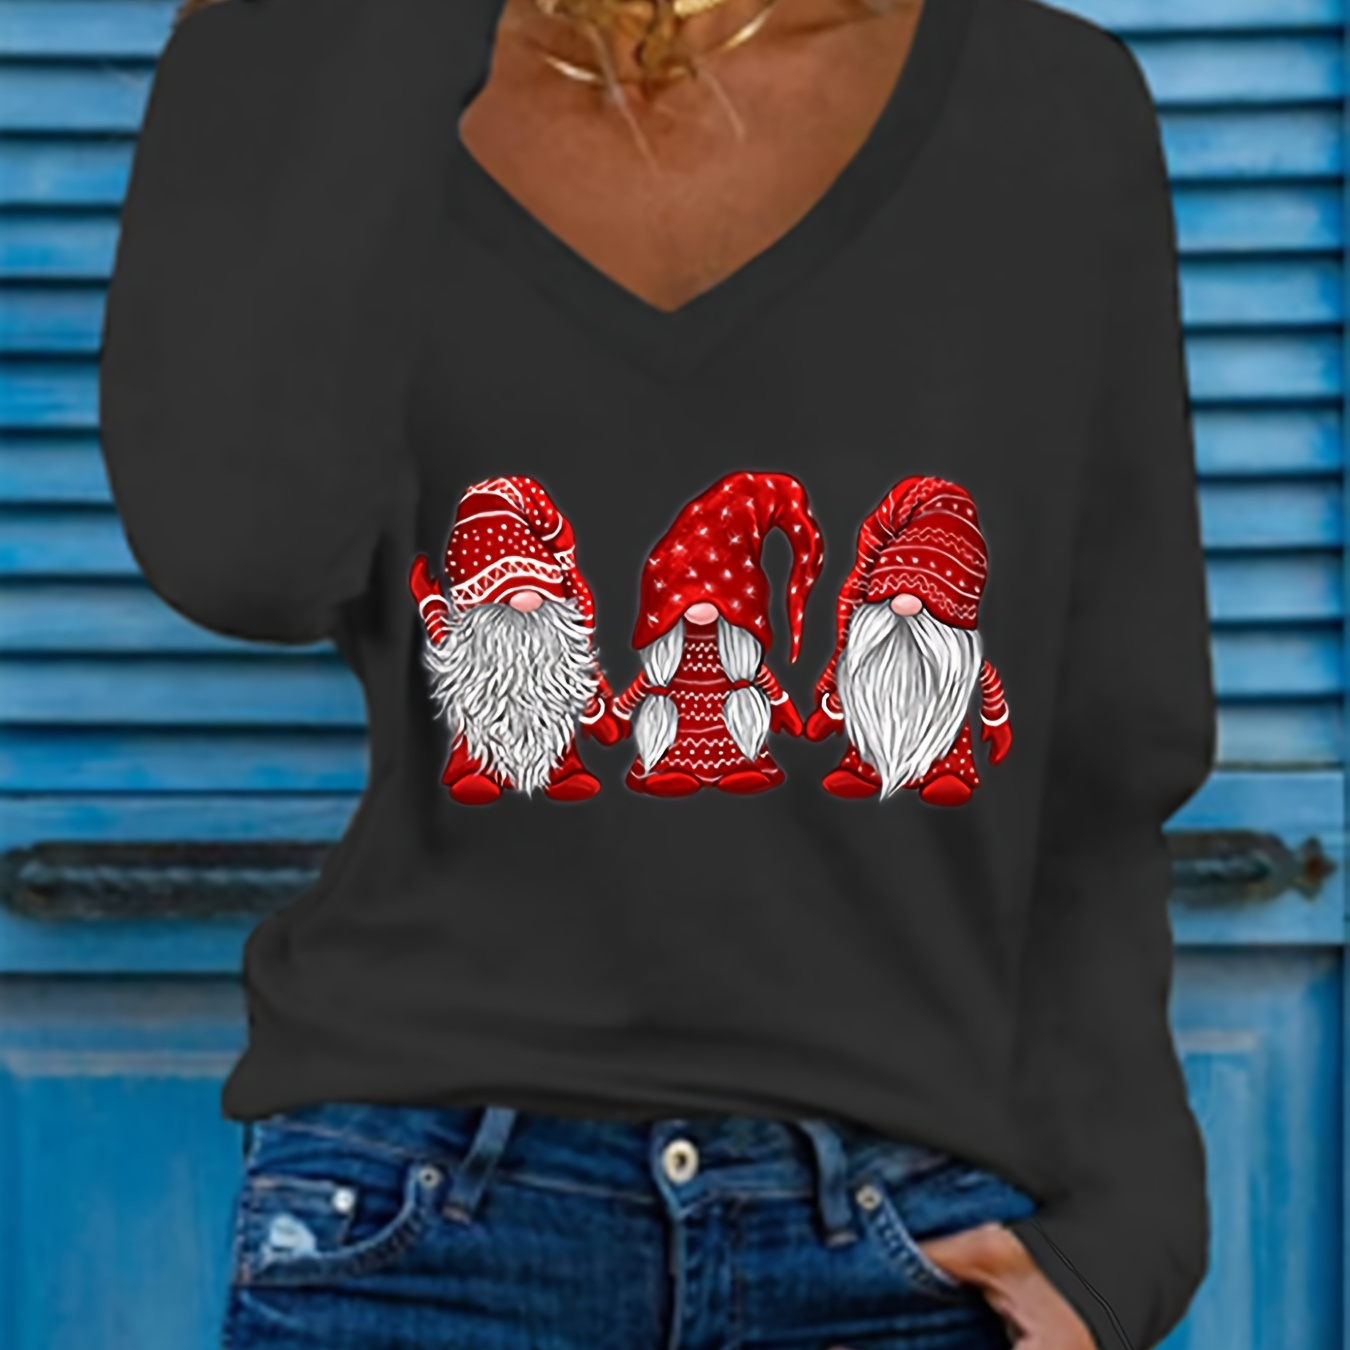 

Gnome Print V Neck T-shirt, Casual Long Sleeve Top For Spring & Fall, Women's Clothing